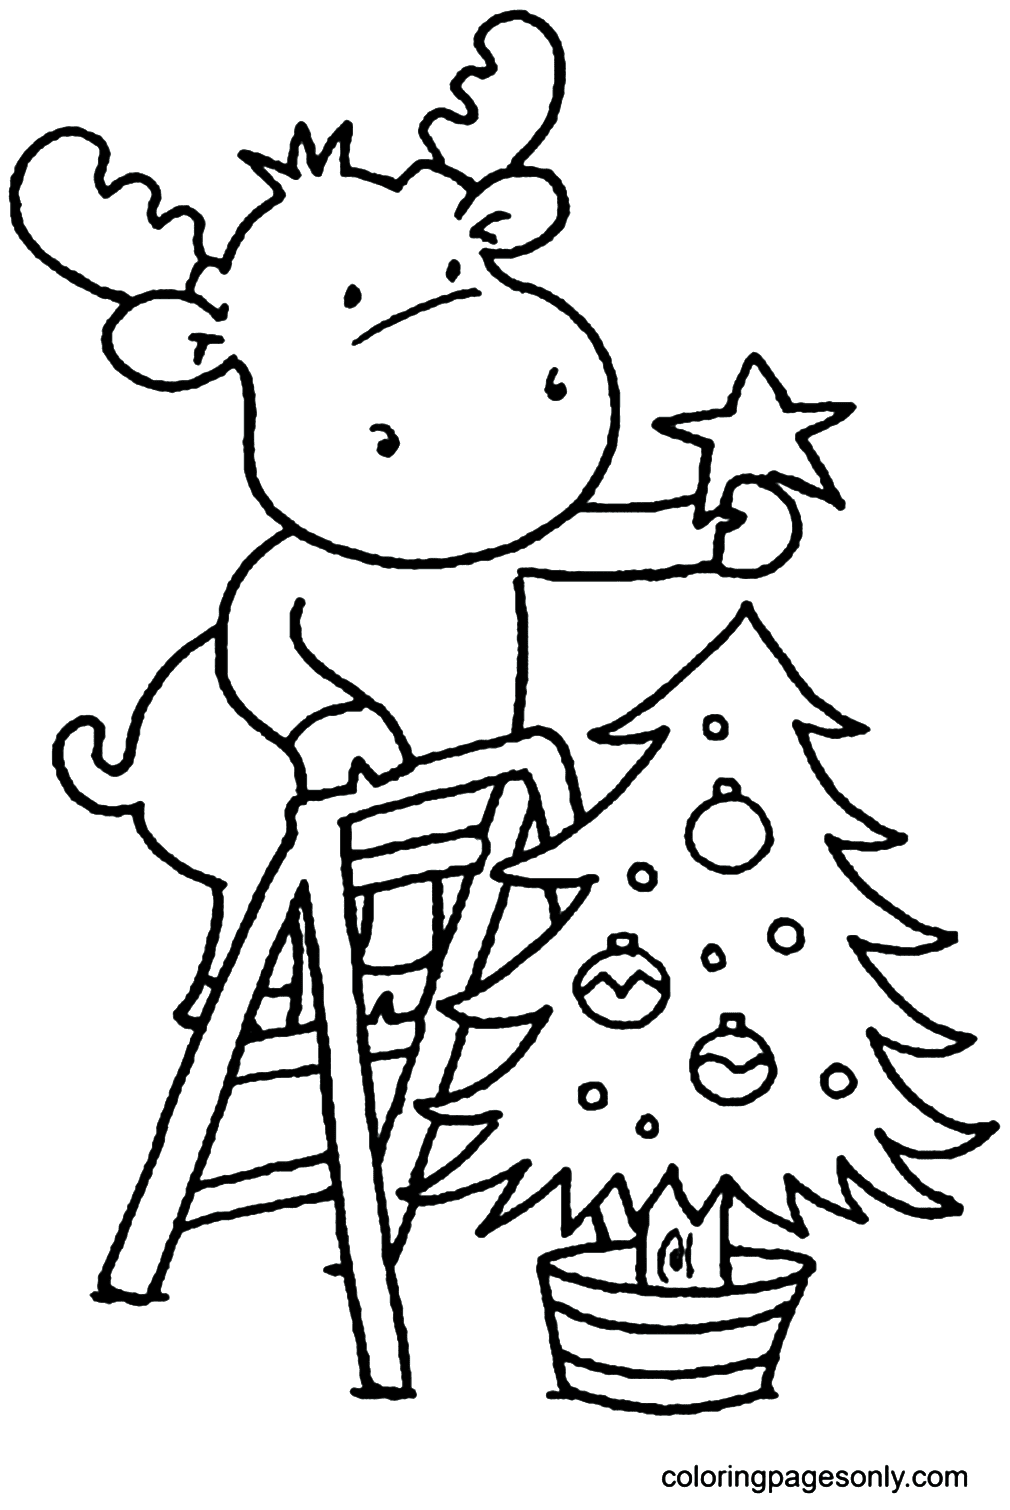 Reindeer Decorating Christmas Tree Coloring Pages